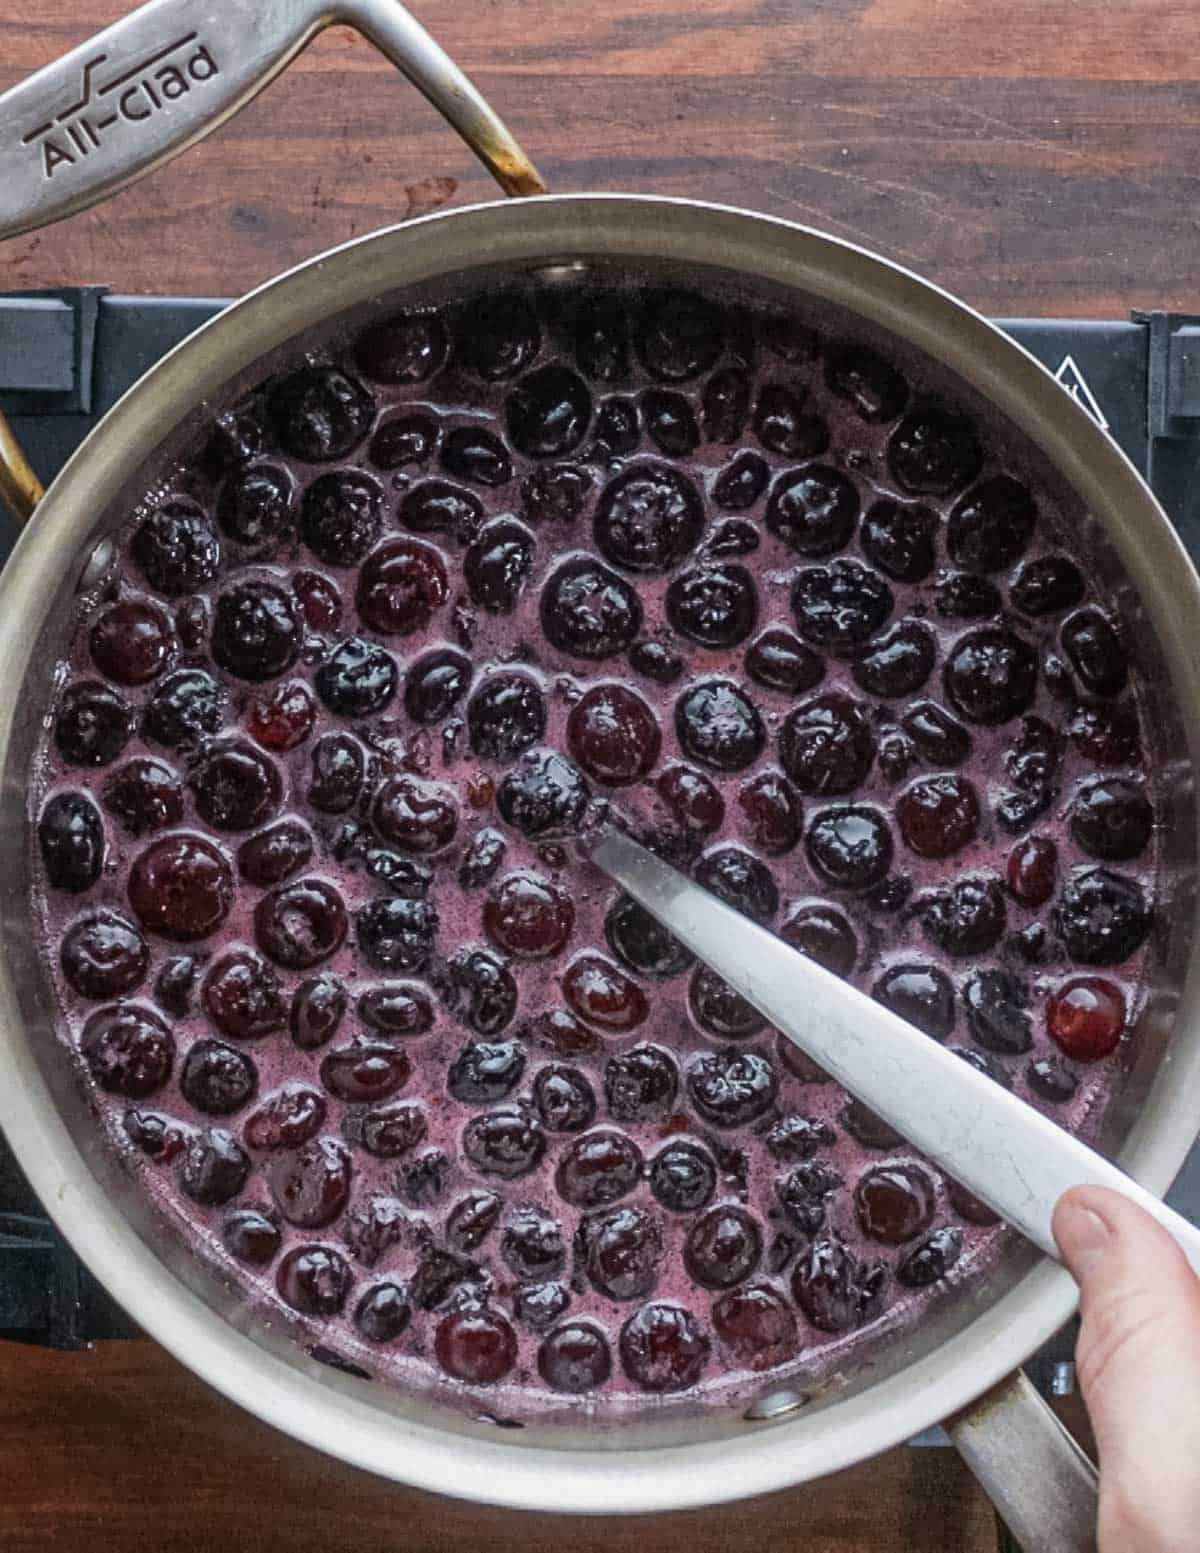 A pan of blueberries in syrup being cooked.